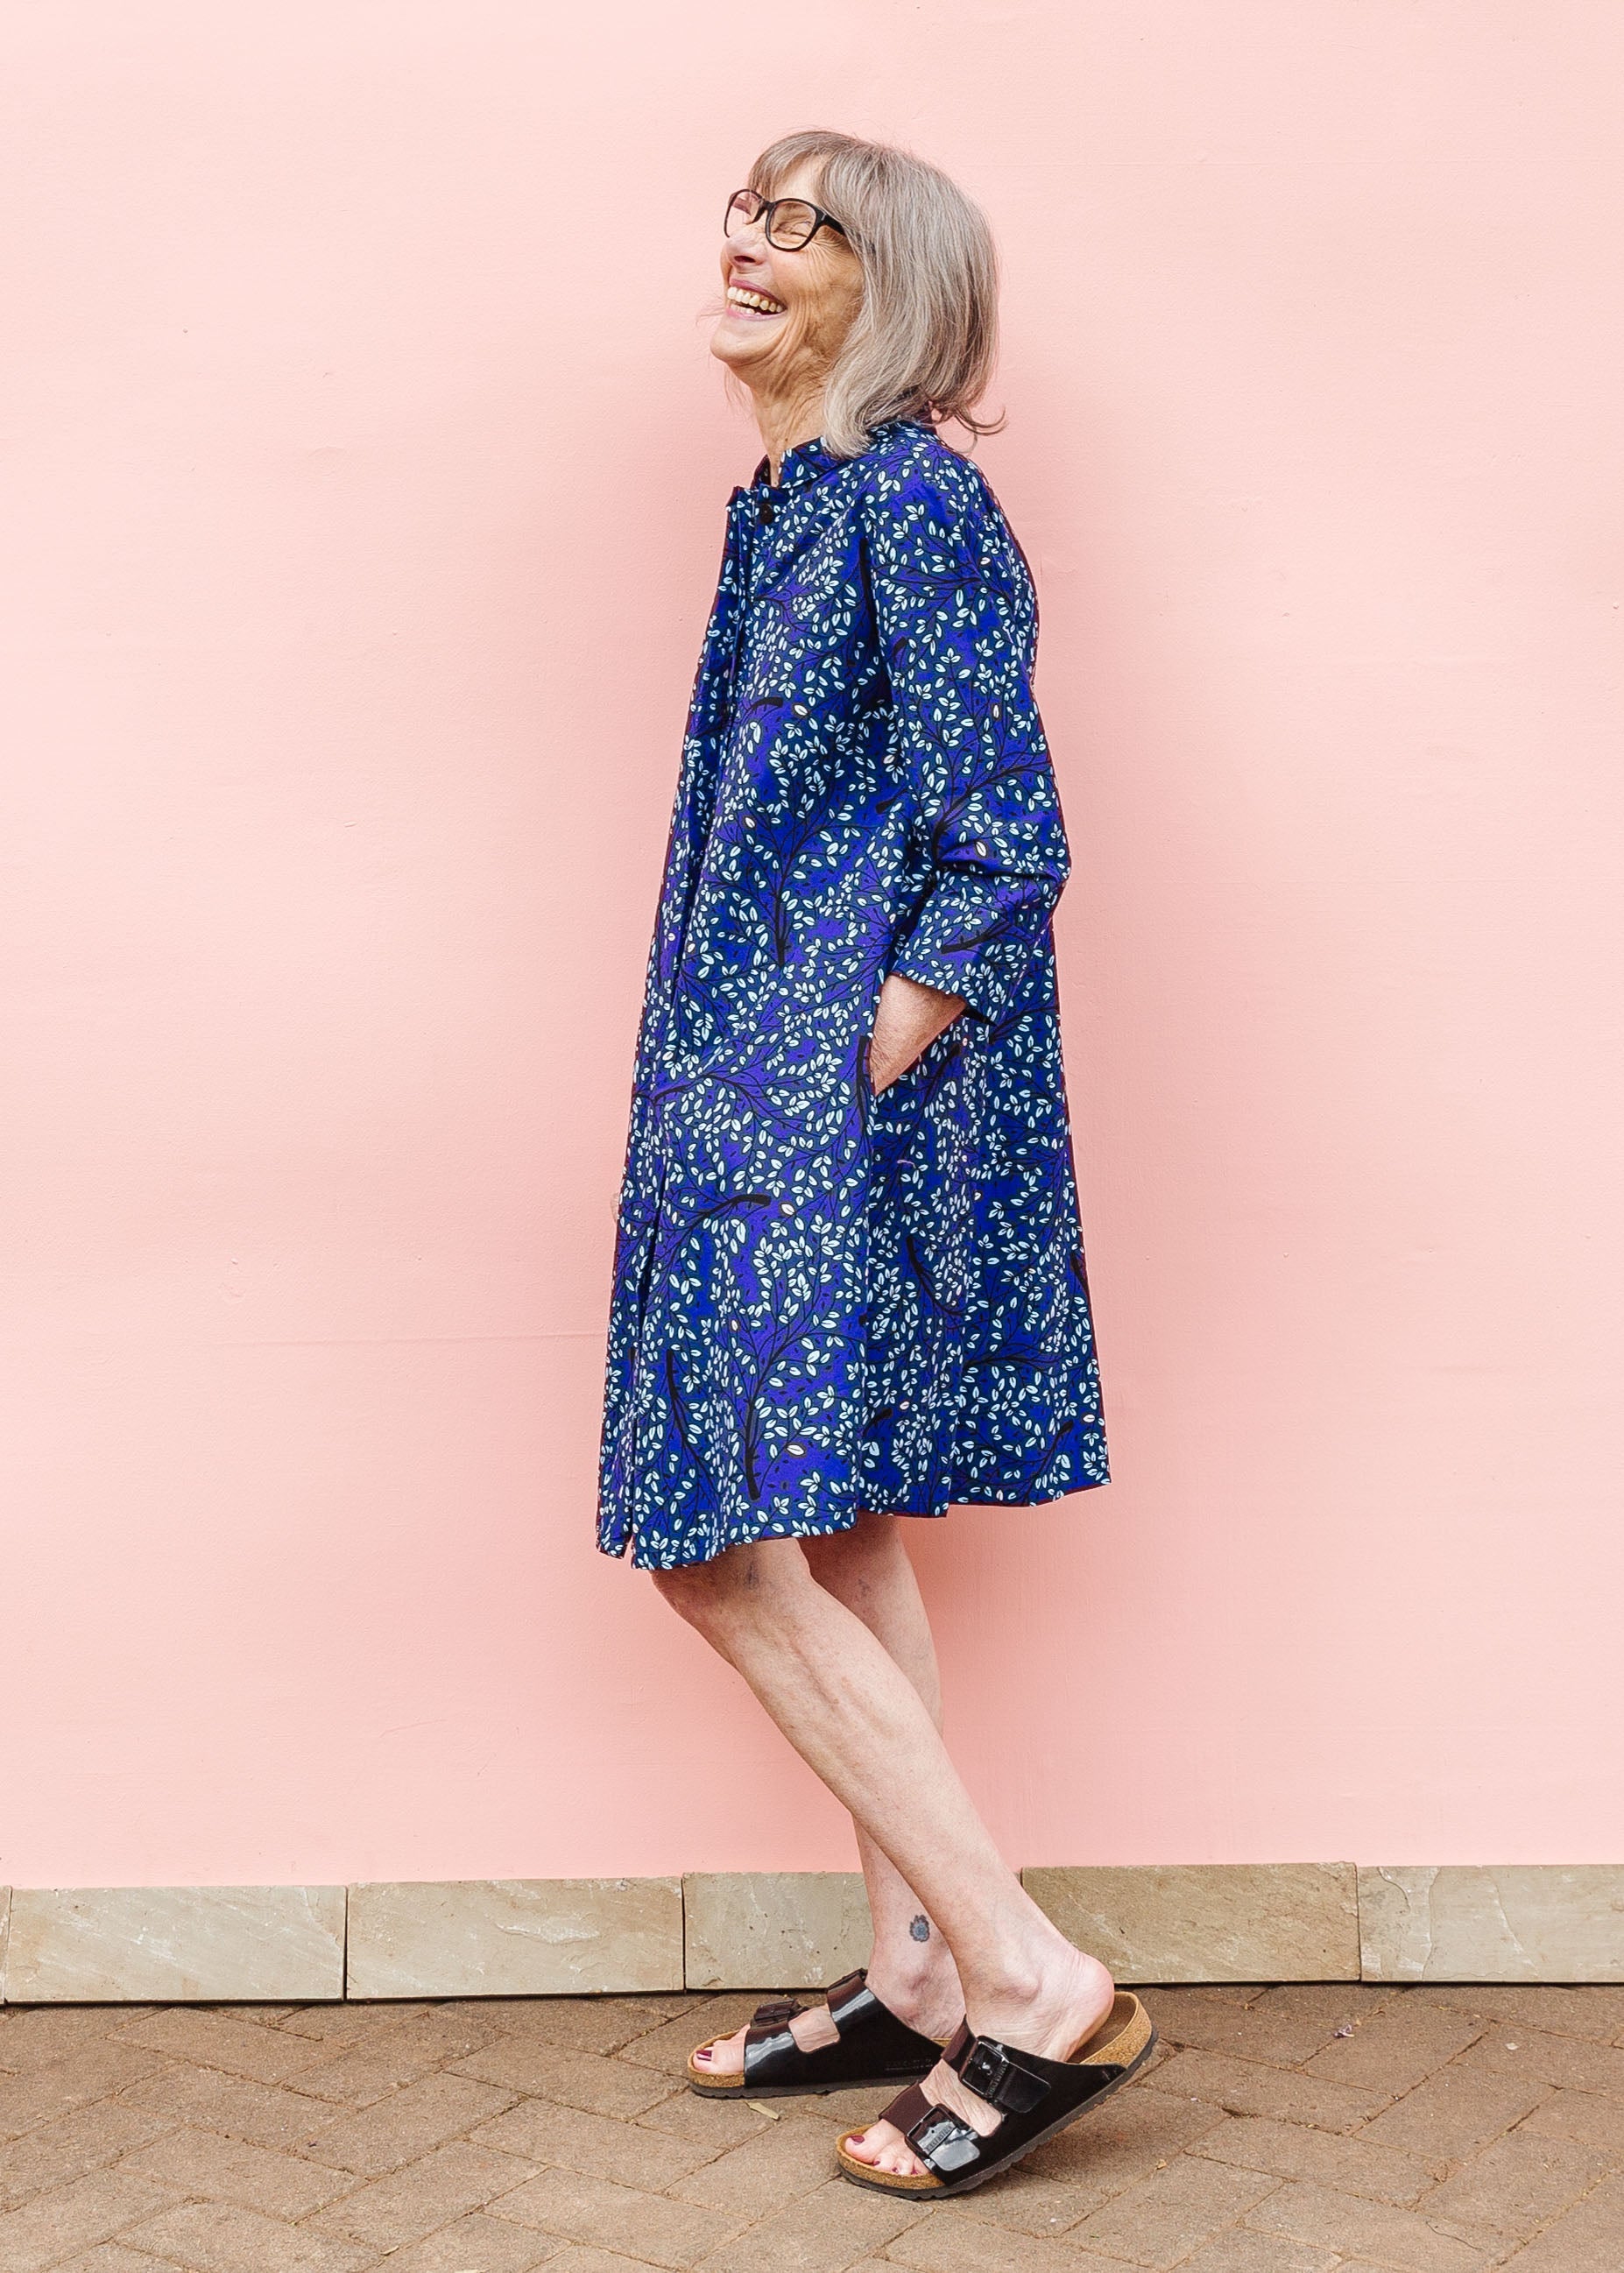 Model wearing blue dress with small vine print.